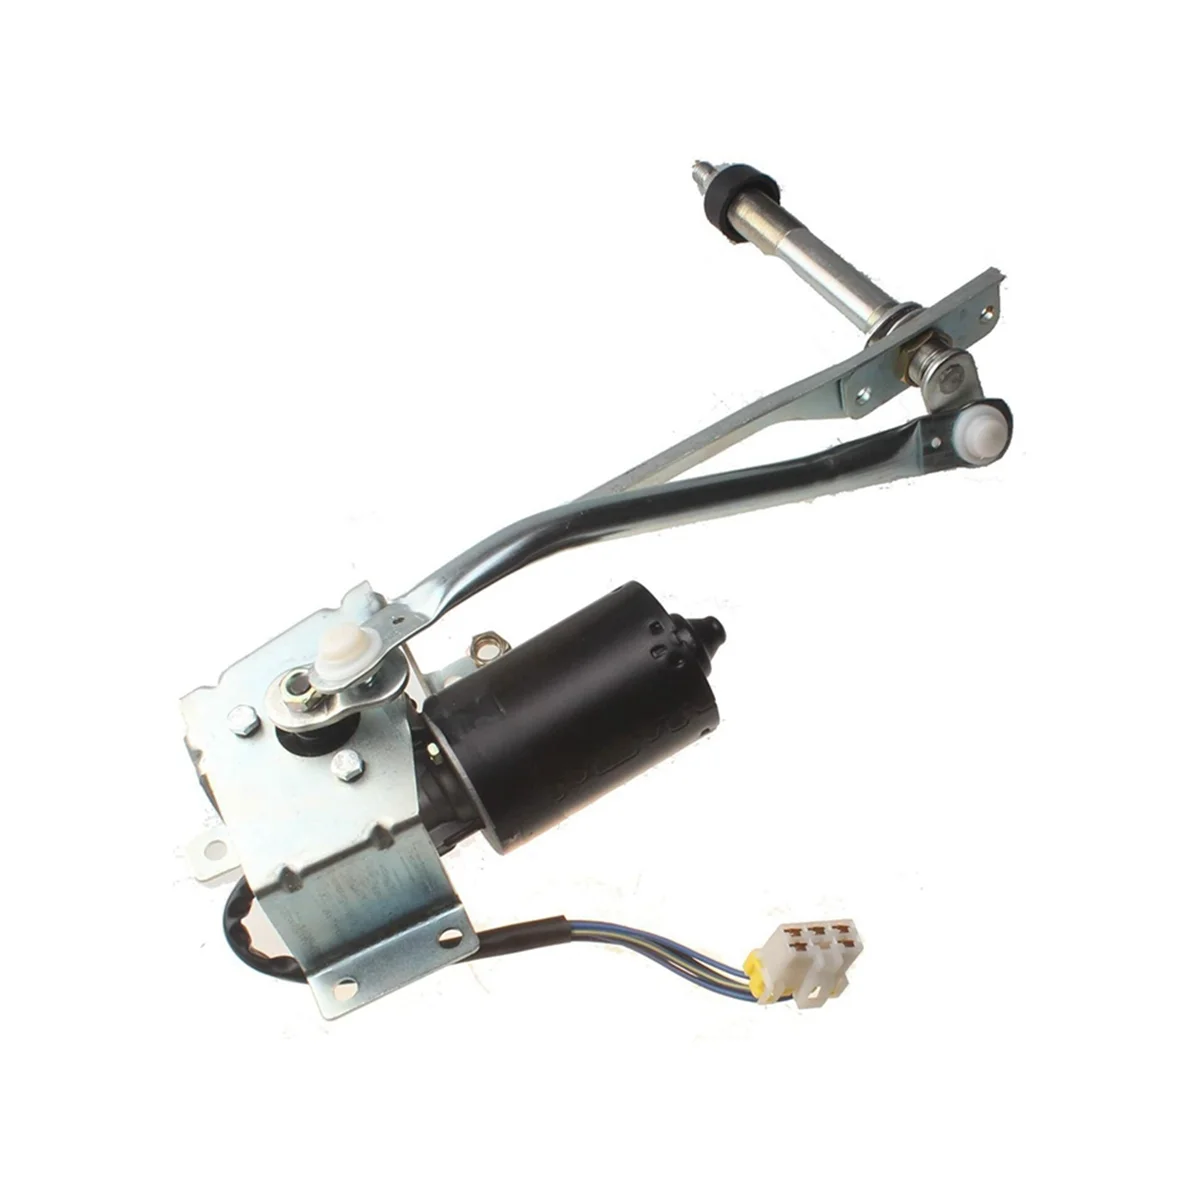 

20Y-54-52211 Excavator Parts Wiper Motor Assembly for Komatsu PC160-7 PC200-7 PC220-7 PC200-8 PC220-8 PC300-8 PC400-8